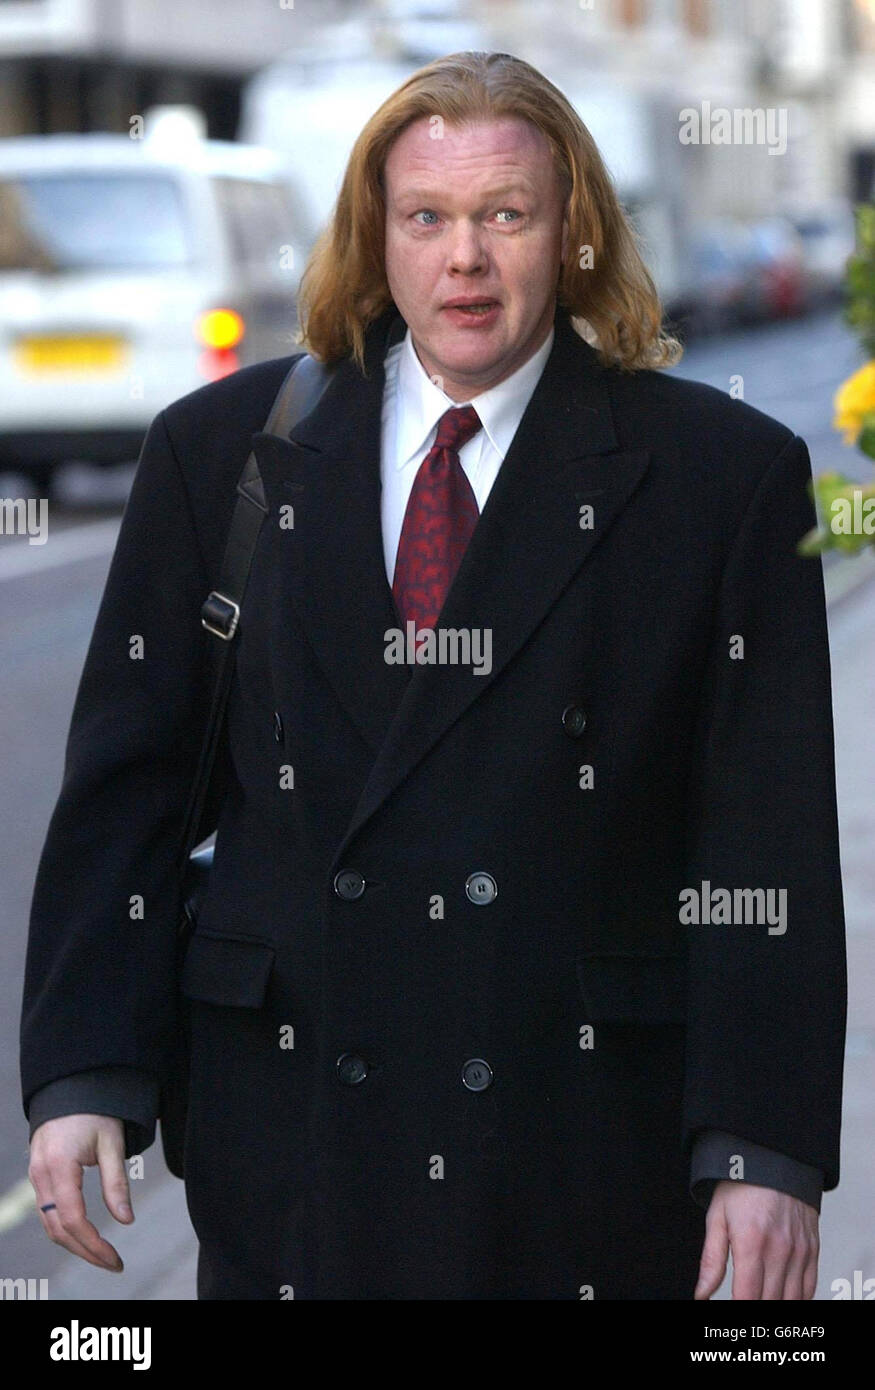 Timothy Willocks arrives at the General Medical Council, London. Mr Willocks is one of seven doctors, some who no longer work at the private clinic for heroin addicts who was today facing a disciplinary hearing over allegations of inappropriate treatment in what is expected to be one of the biggest cases in the General Medical Council's 145-year history. The charges relate to alleged inappropriate prescriptions of methadone, a widely-used heroin substitute, for patients at the Stapleford Centre, which has sites in Ongar, Essex, and Belgravia, central London. Stock Photo